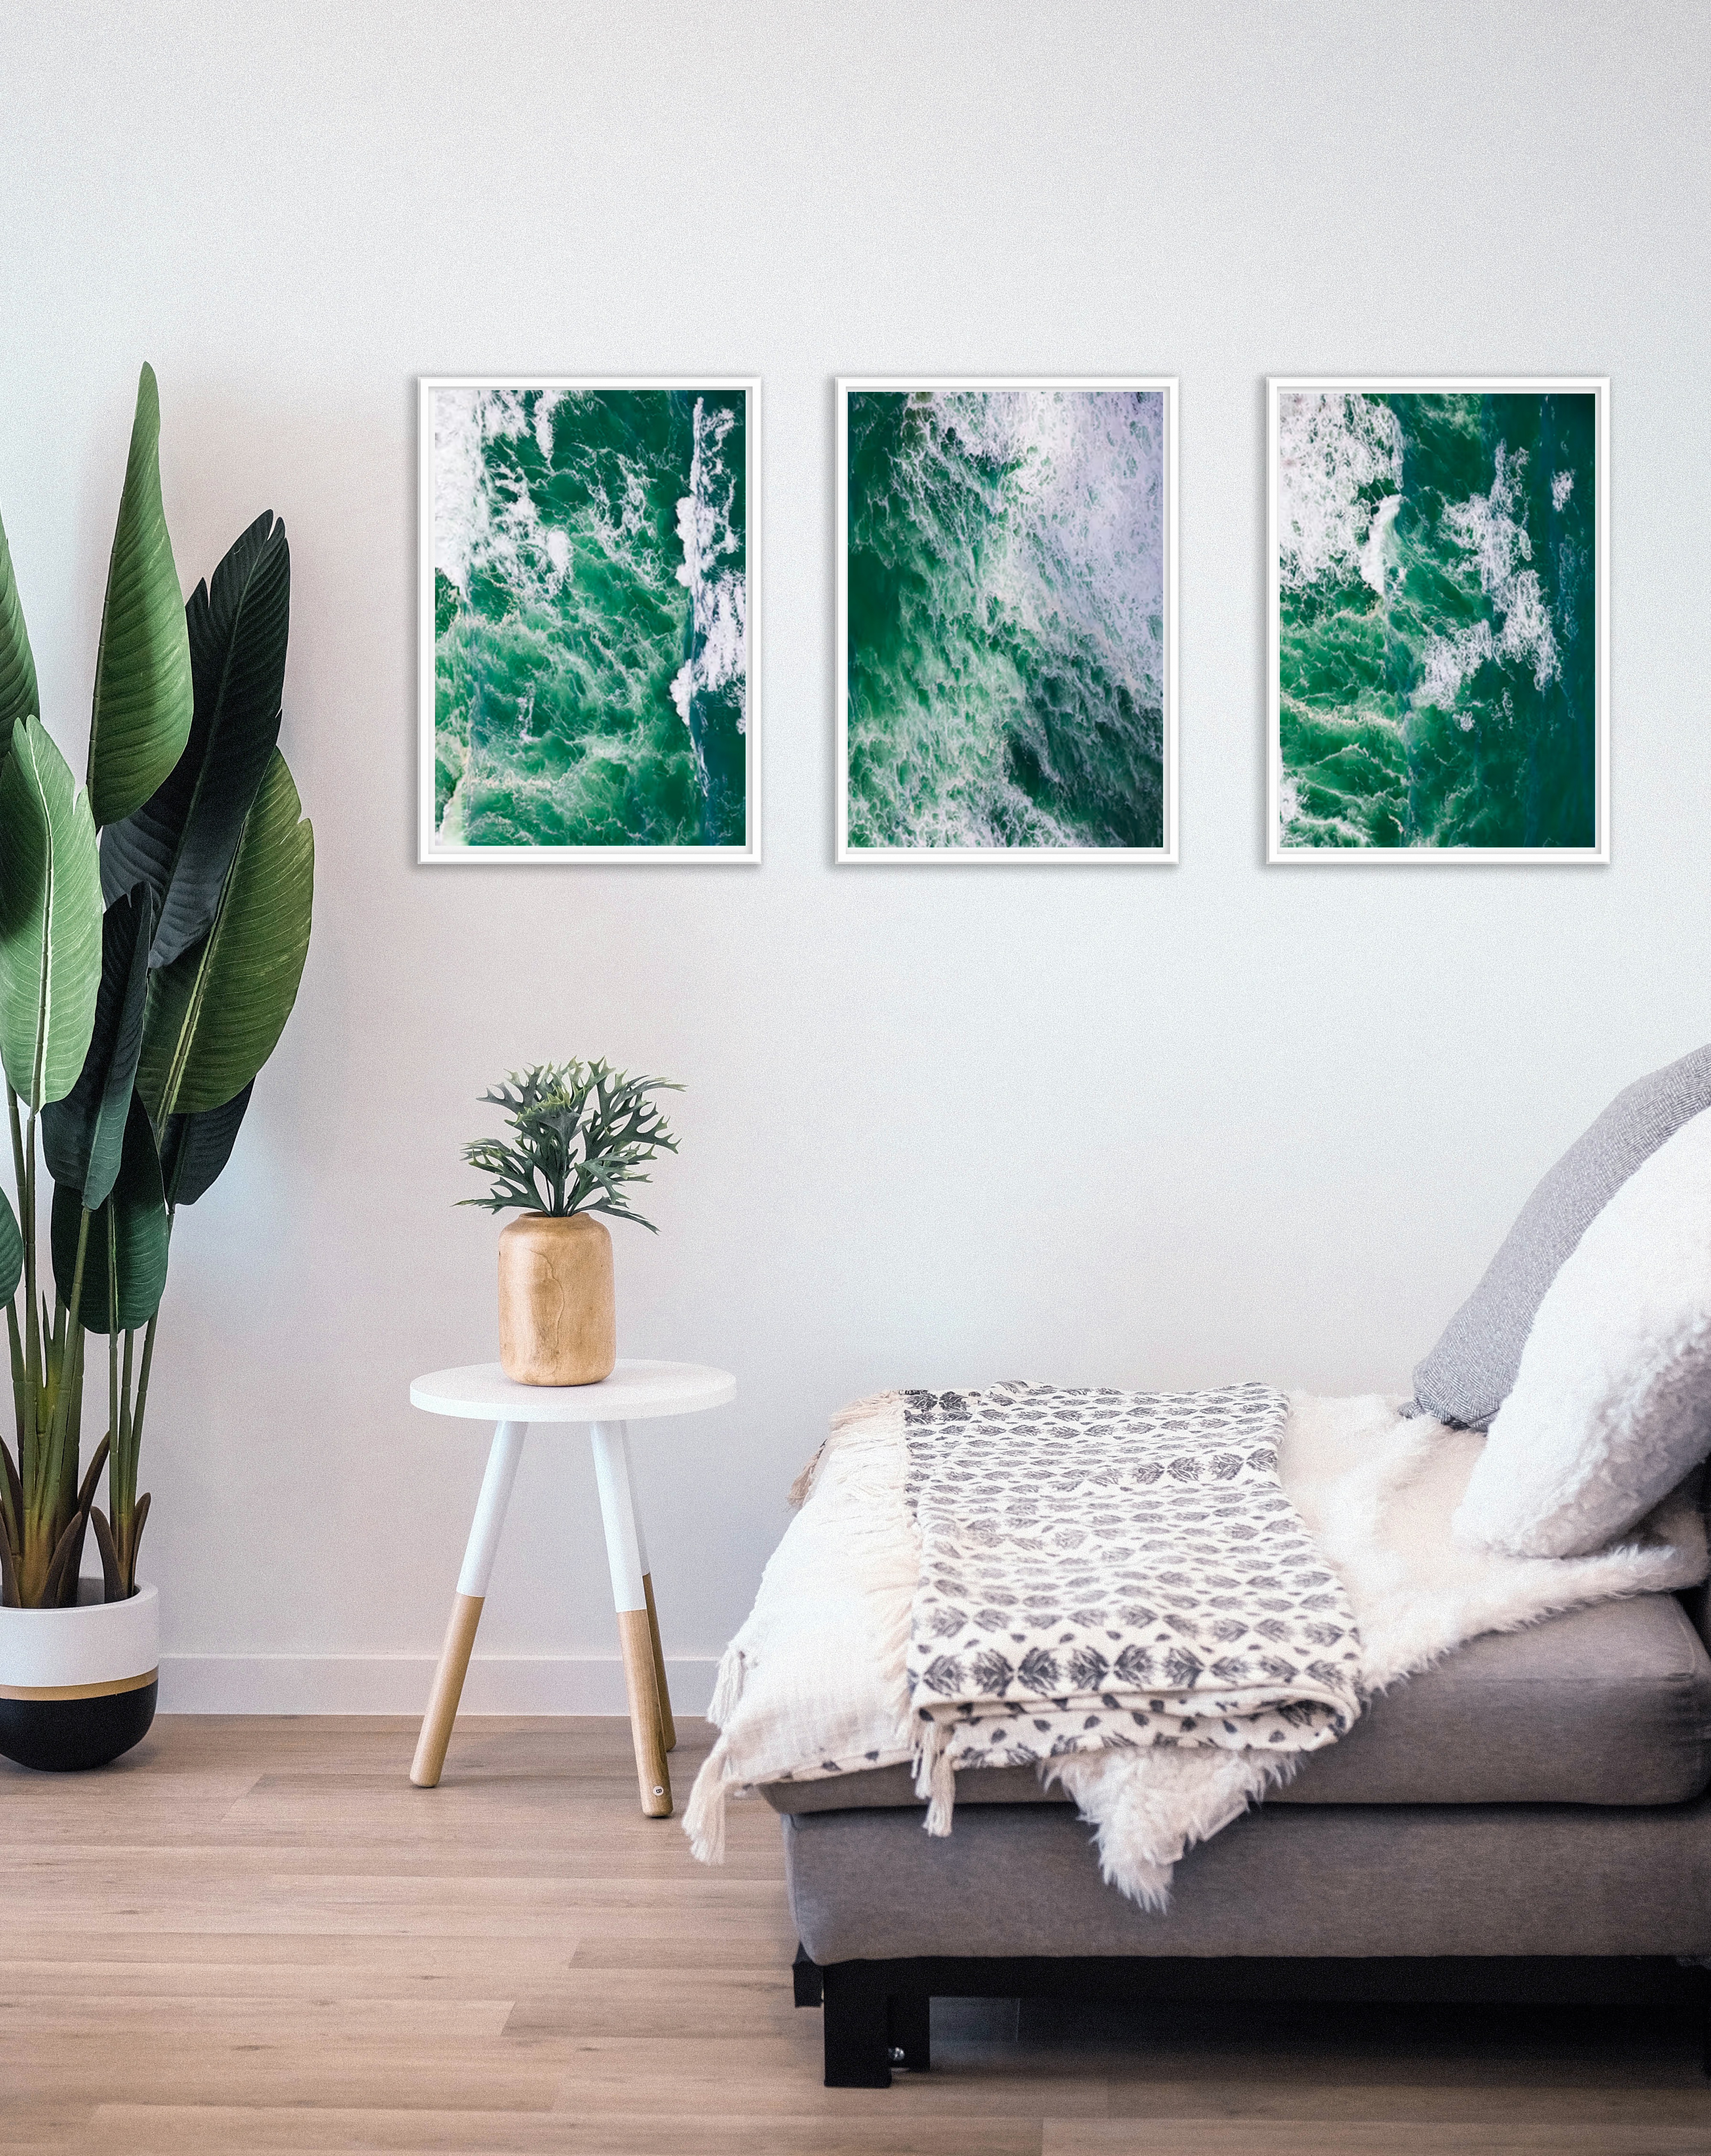 Create your own beautiful Triptych photography photo prints that will make the perfect home decor to liven up your walls with free next day dleivery UK